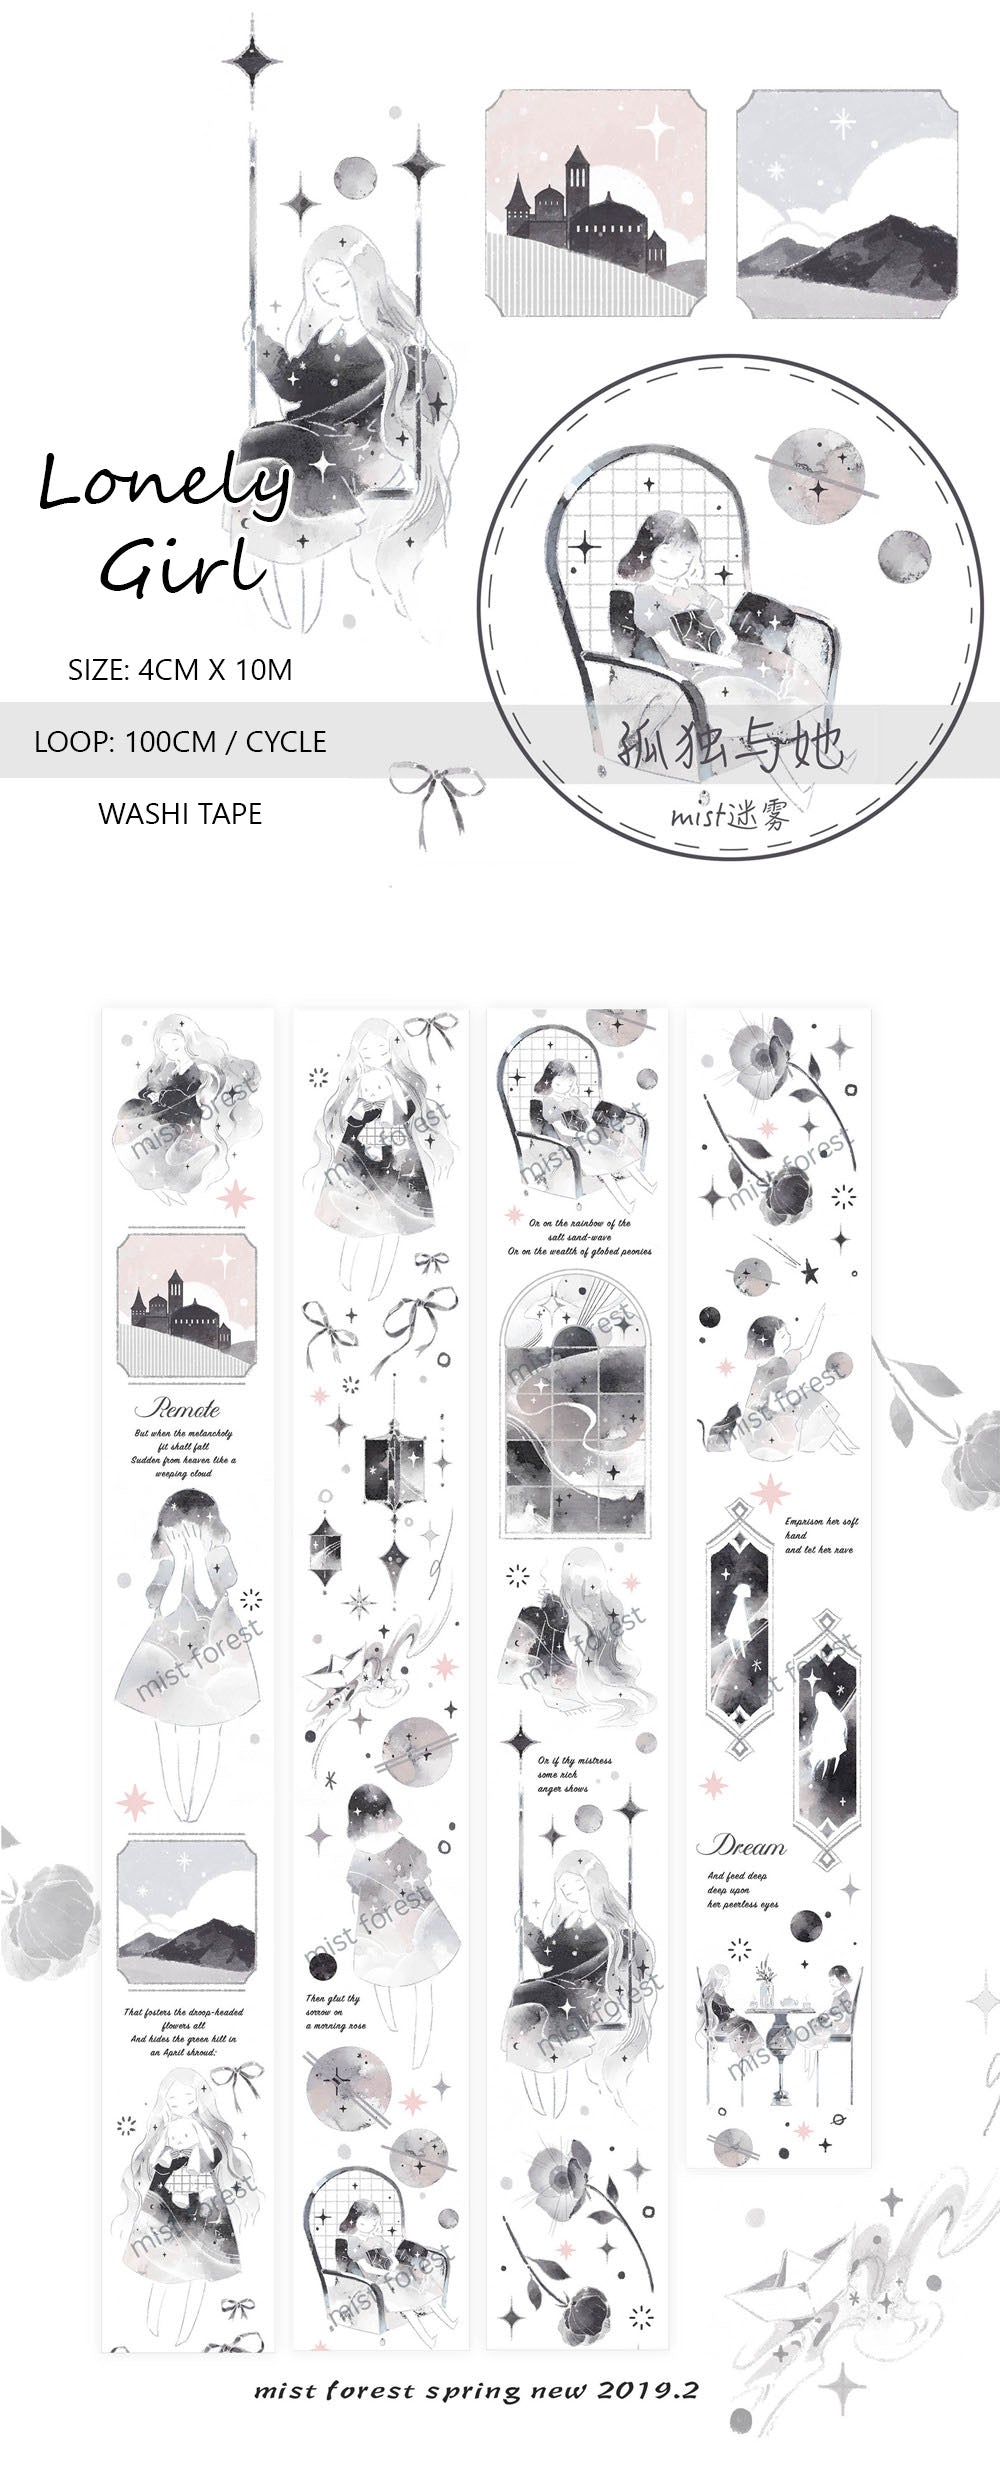 Mist Forest Washi Tape: Lonely Girl